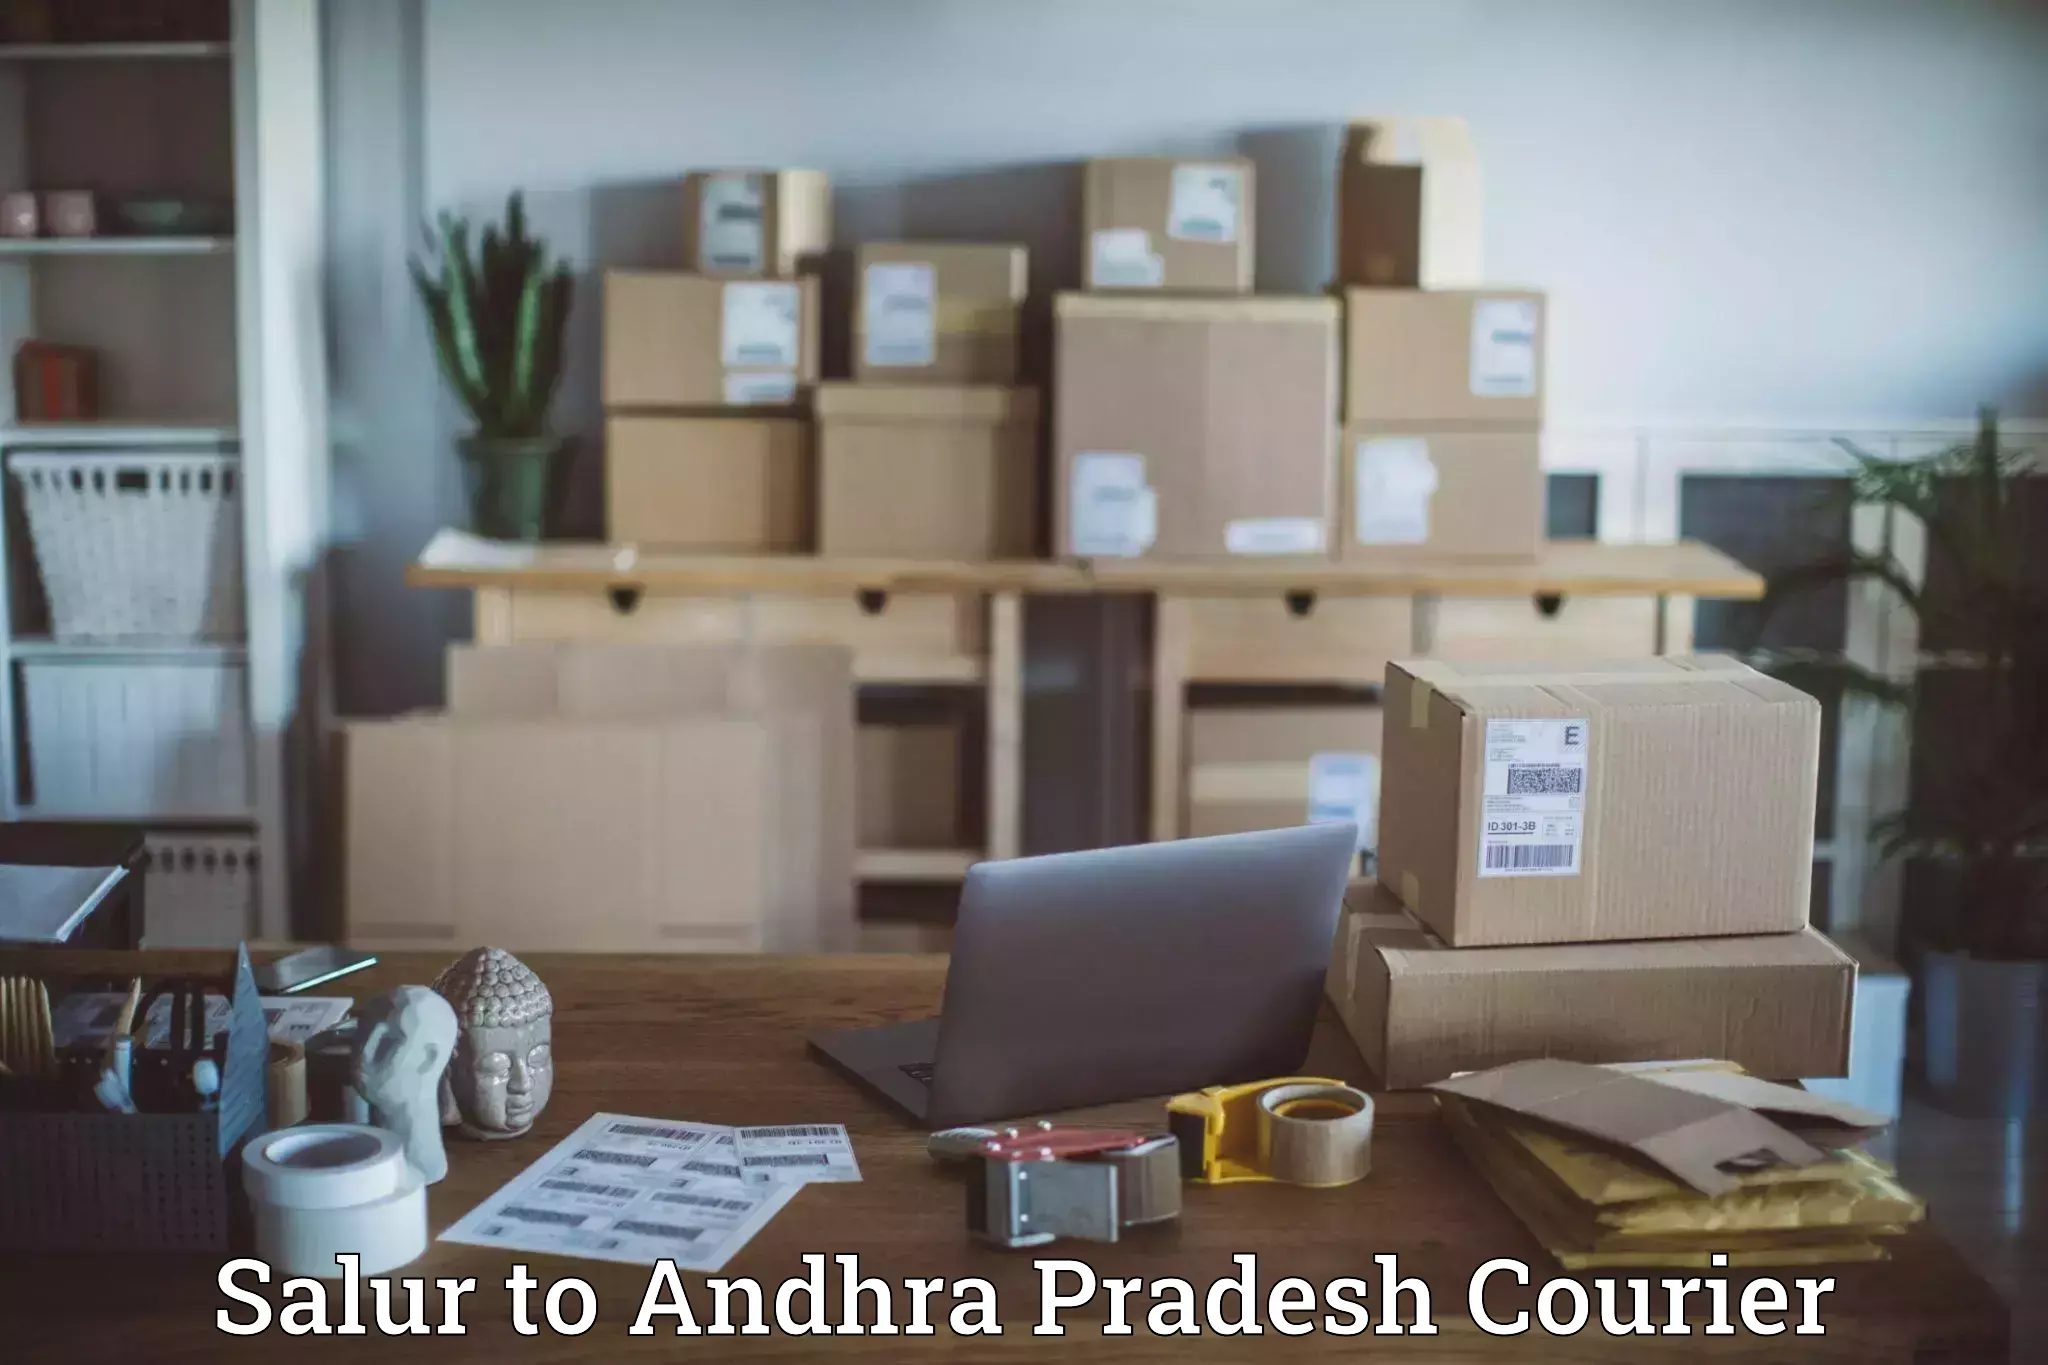 Courier dispatch services in Salur to Nuzvid